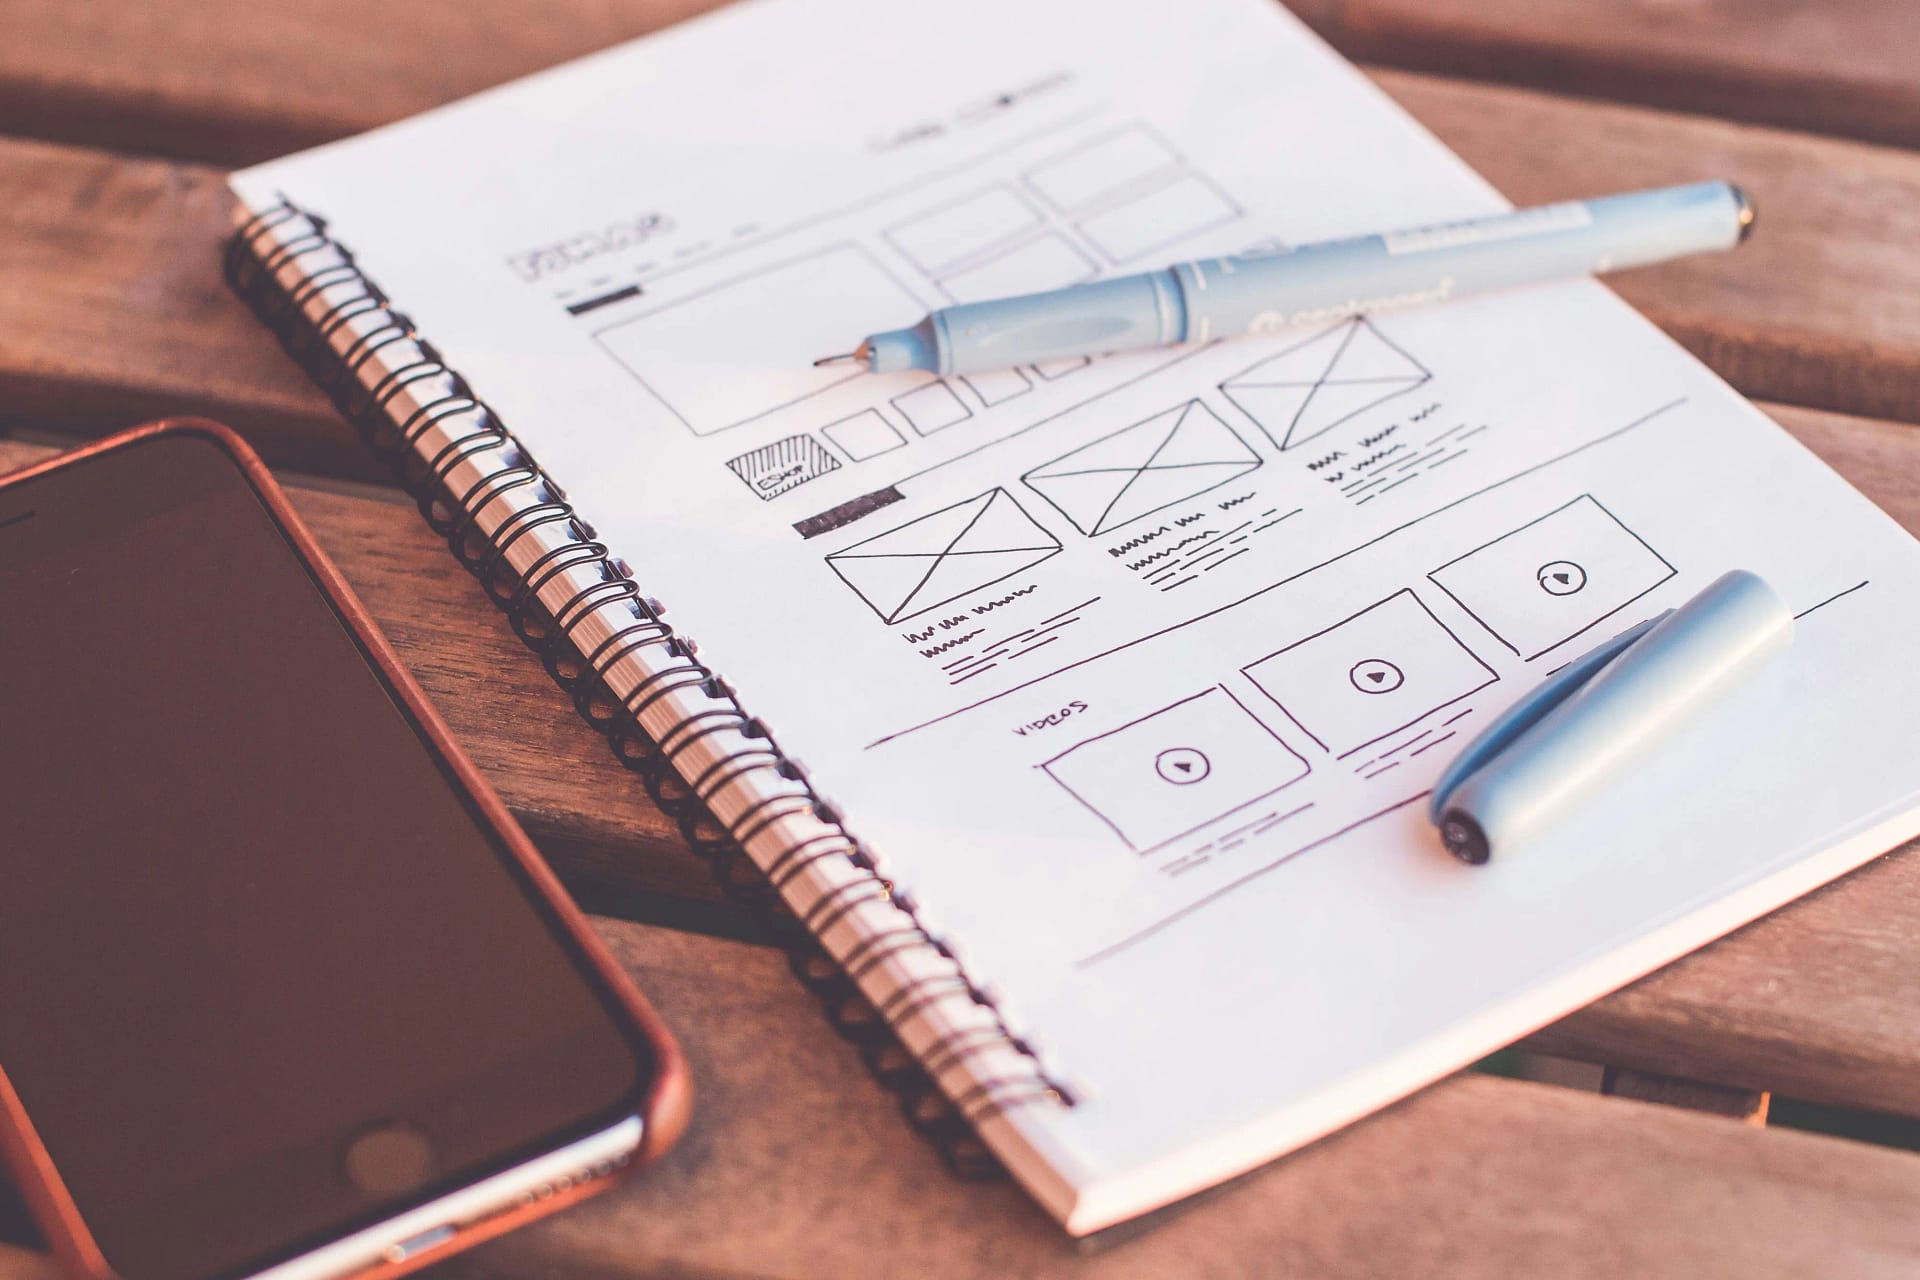 Top UI/UX Design Tools for Creating Exceptional Digital Experiences